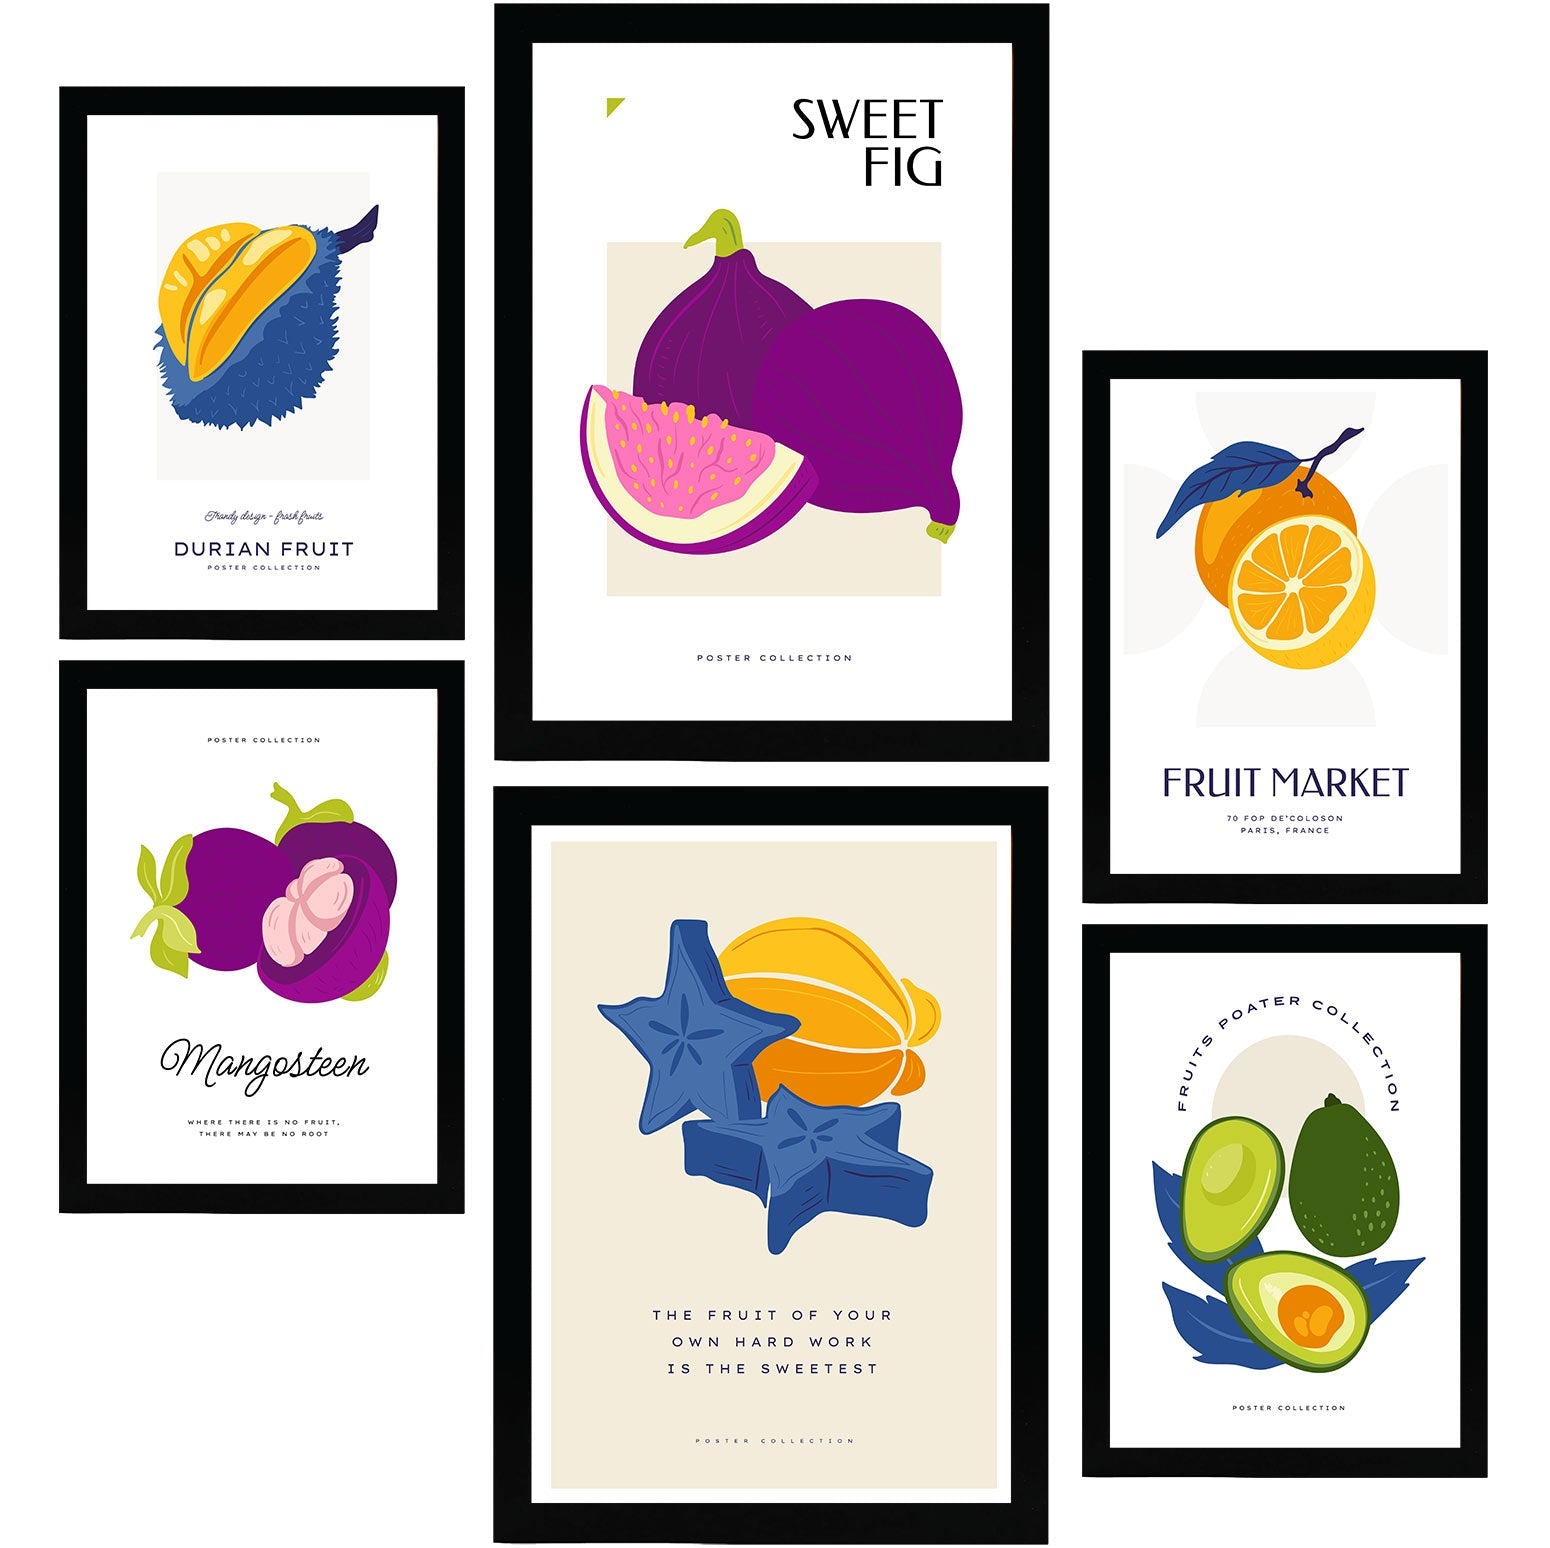 Food and Plants Posters. Fruit Collage. Nature and Botany-Artwork-Nacnic-Nacnic Estudio SL